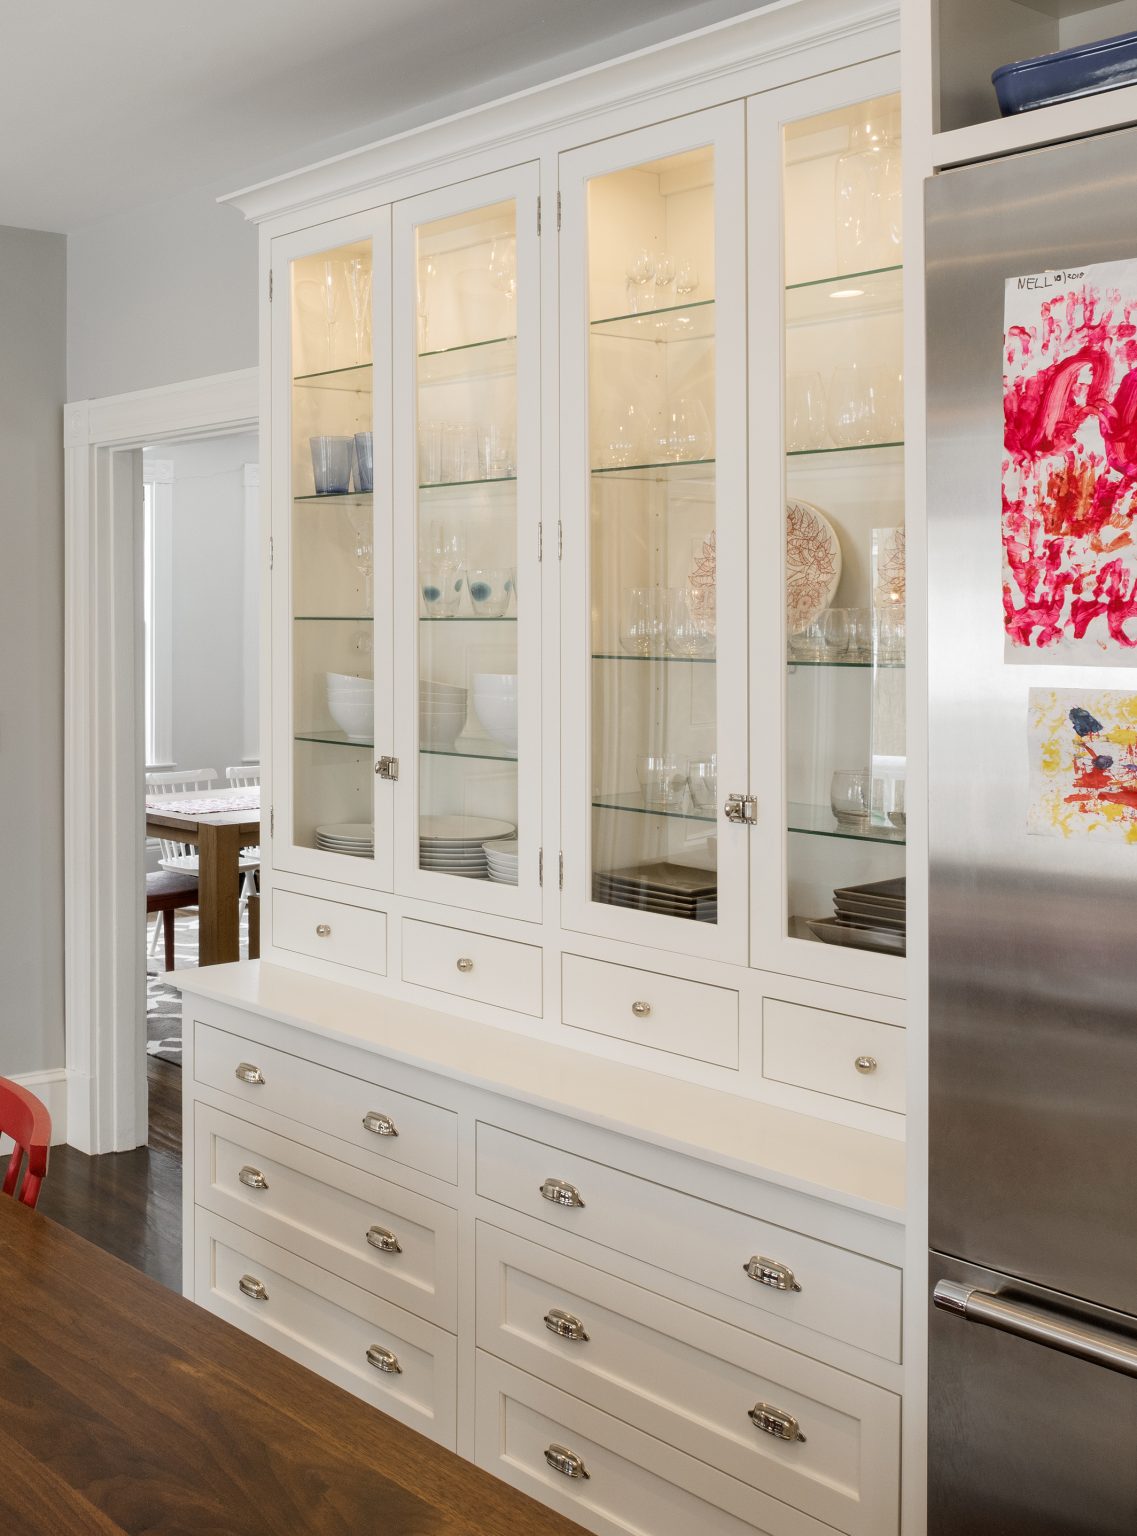 Kitchen Cabinet Style Guide: 3 Types of Cabinets Explained